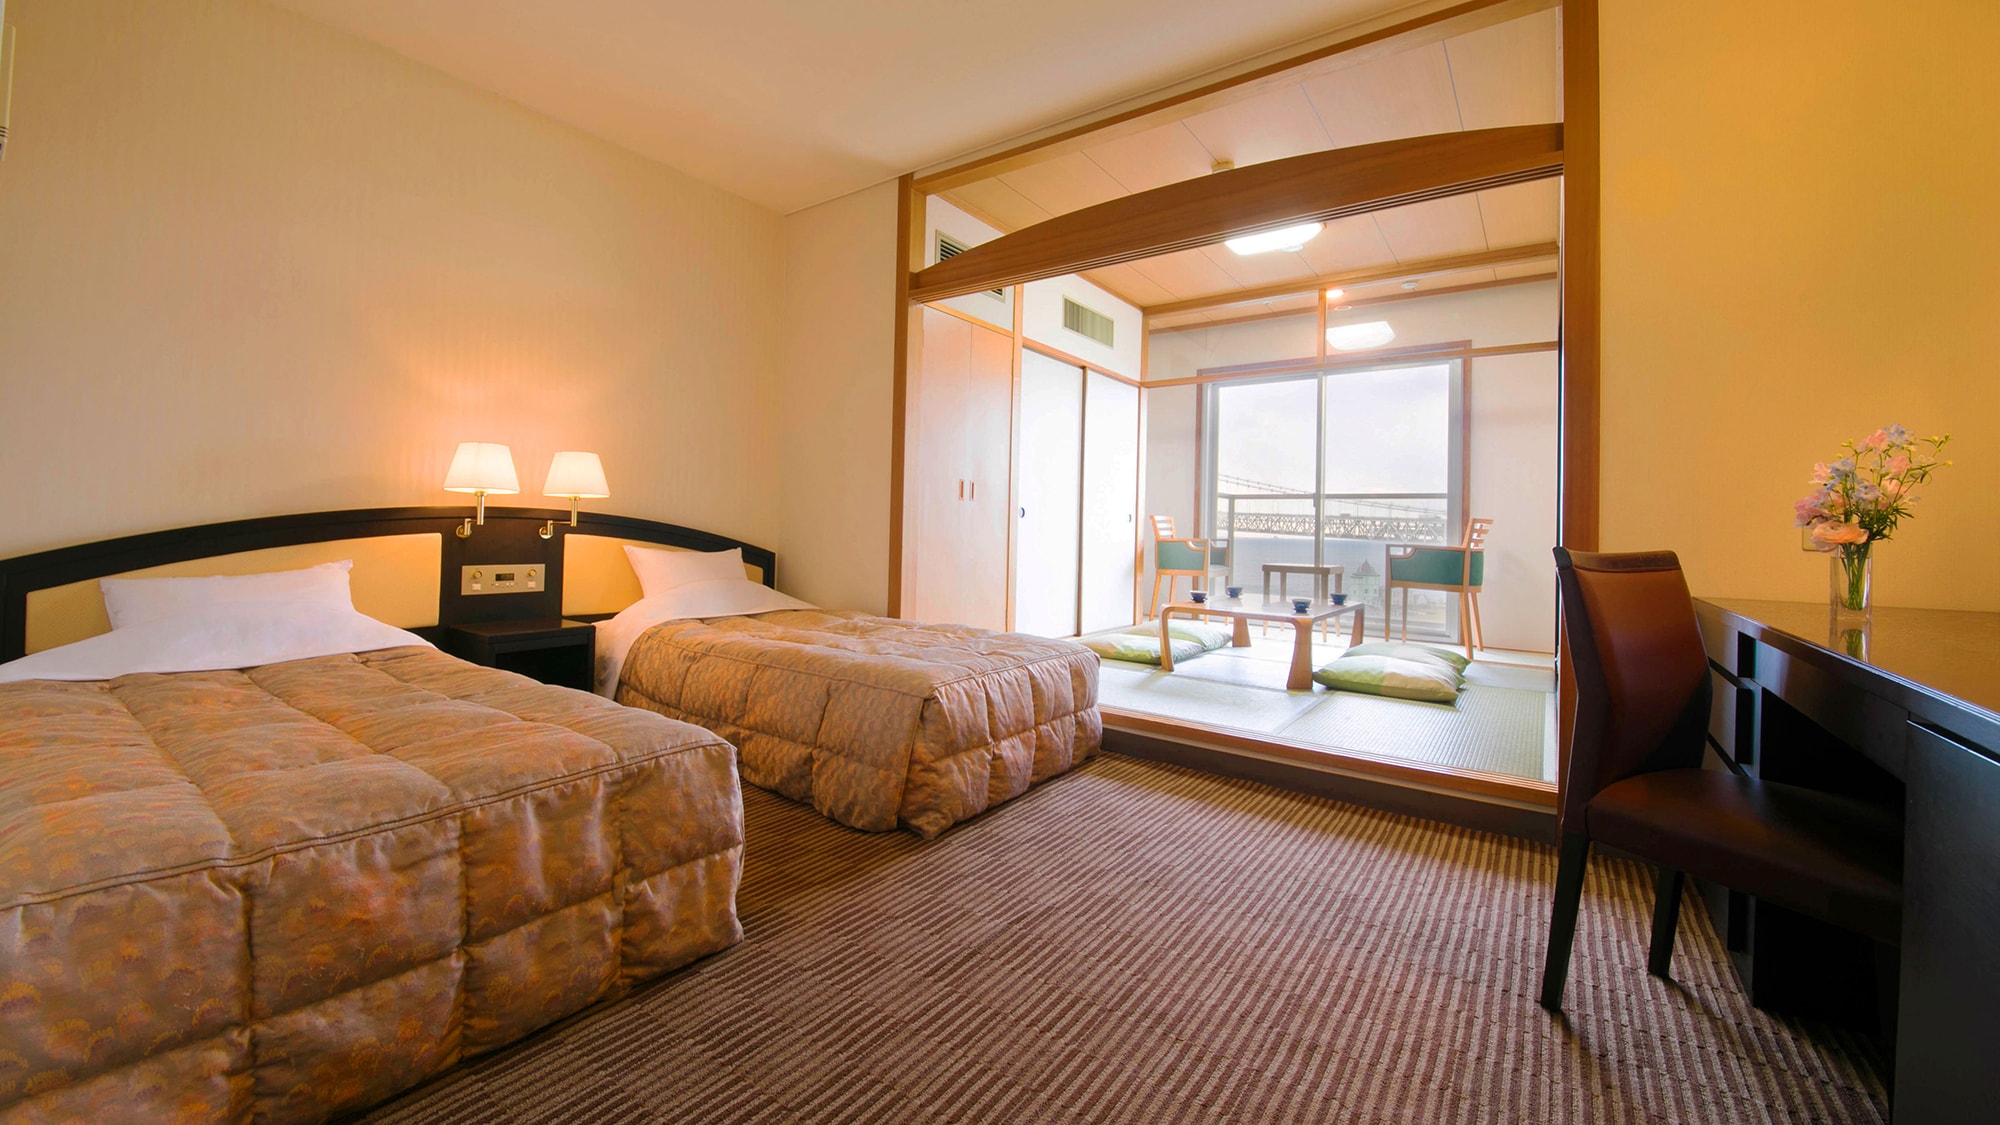 ■ Ryokufukan-Japanese-Western style room-■ 34㎡, 100cm wide Japanese-Western style room with 2 beds. A spacious space where you can enjoy the train view